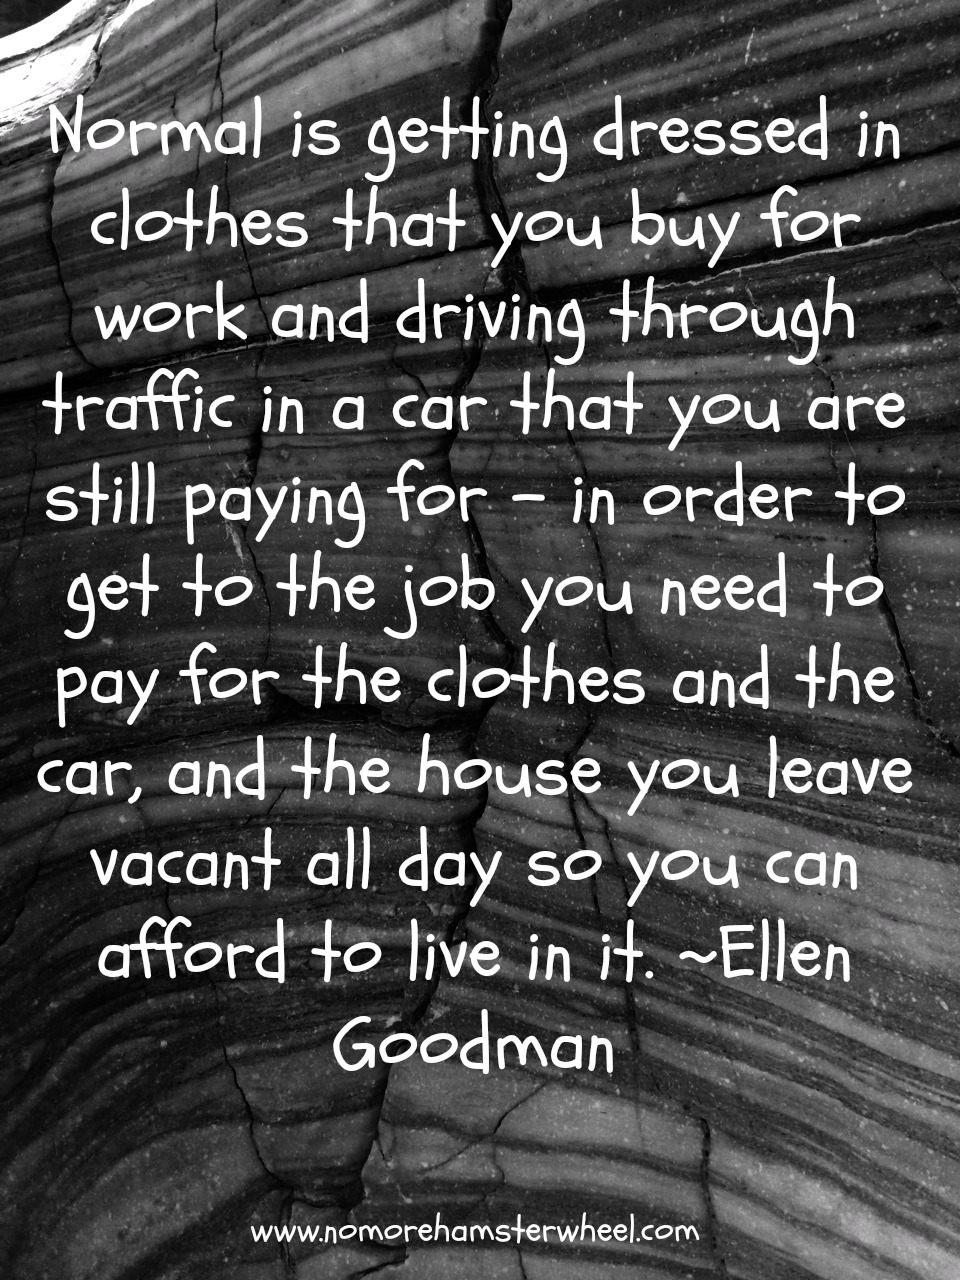 Normal is getting dressed in clothes that you buy for work and driving through traffic in a car that you are still paying for – in order to get to the job you need to pay … Ellen Goodman